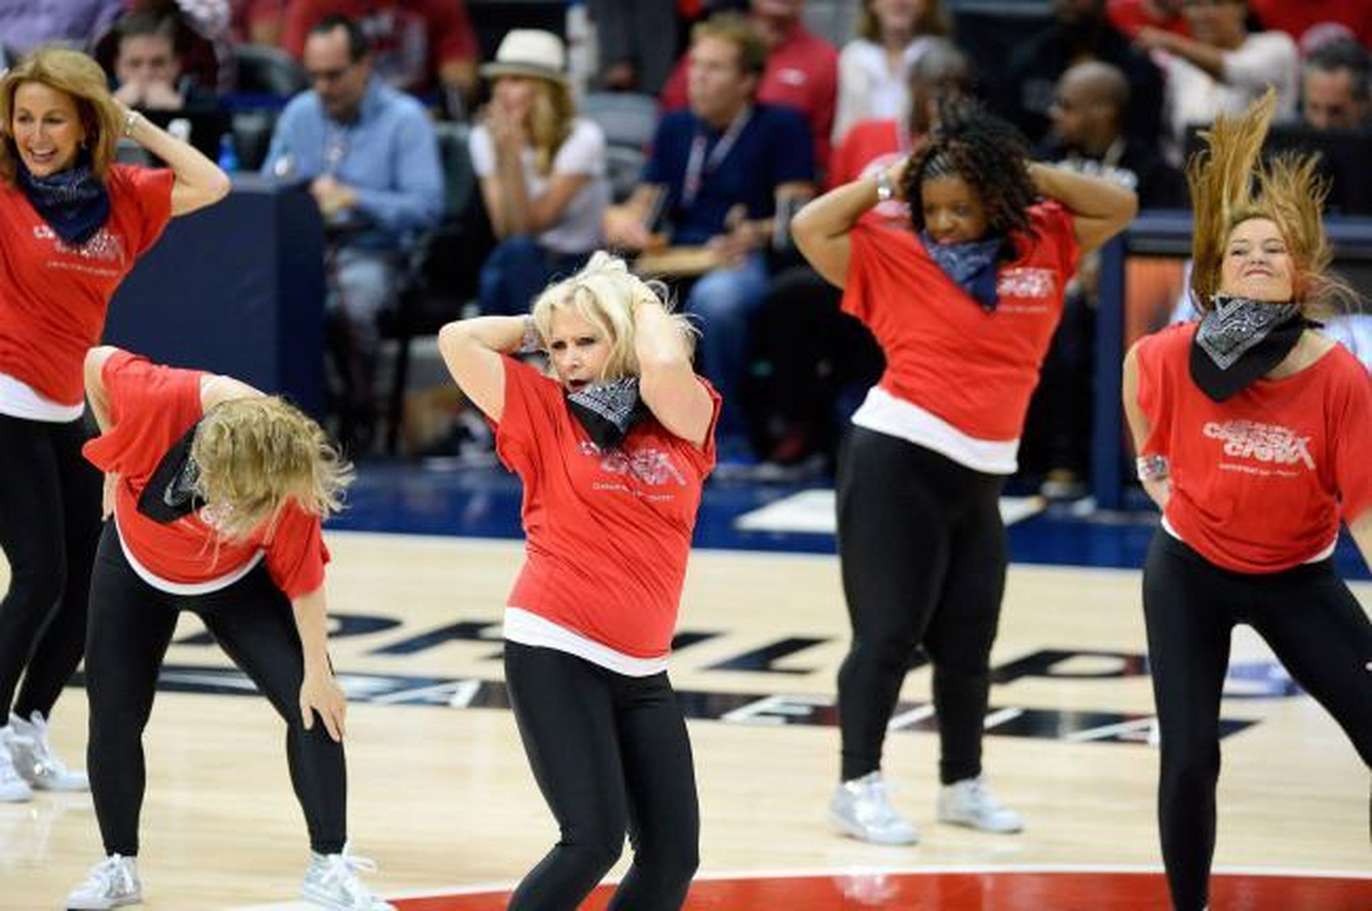 Life with Gracie: Dancers for Hawks games vying for international hip-hop title